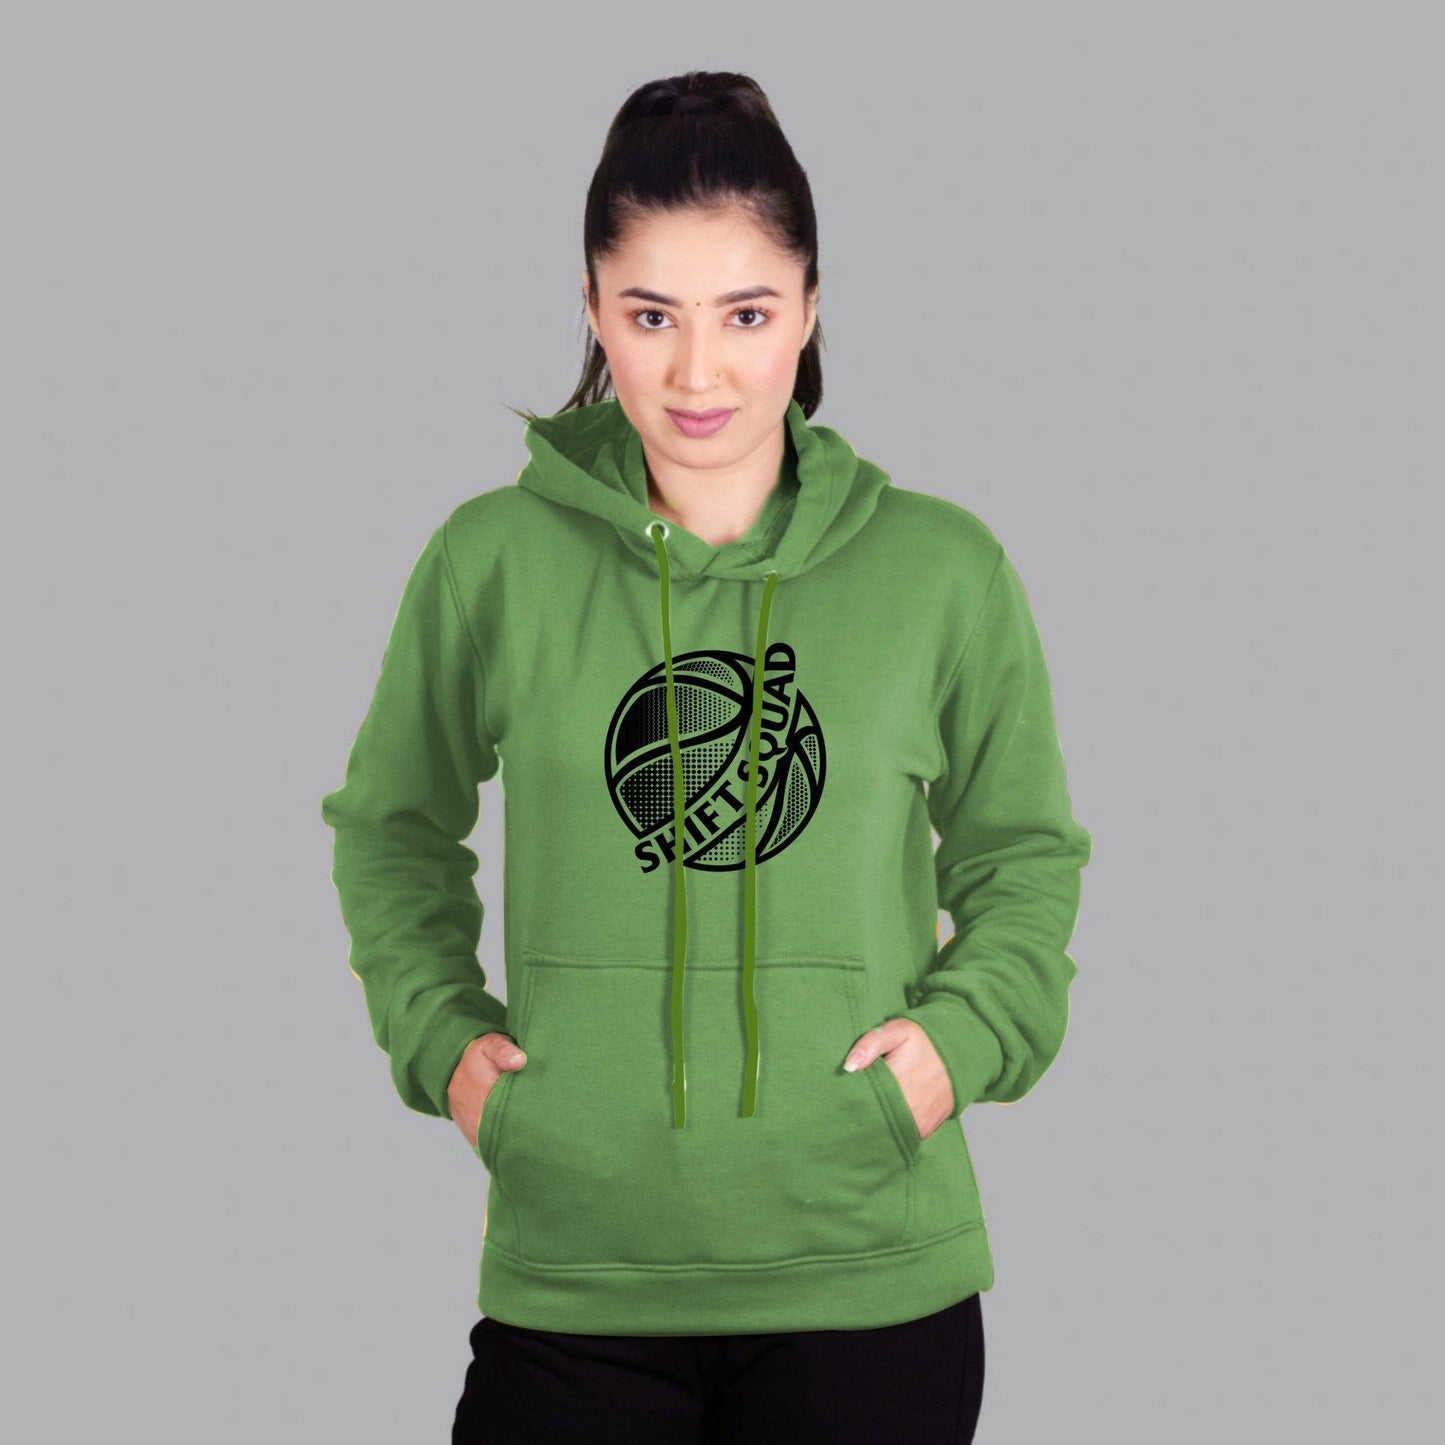 Shiftsquad Hoodies for Women Spring and Summer line | ShiftSquad